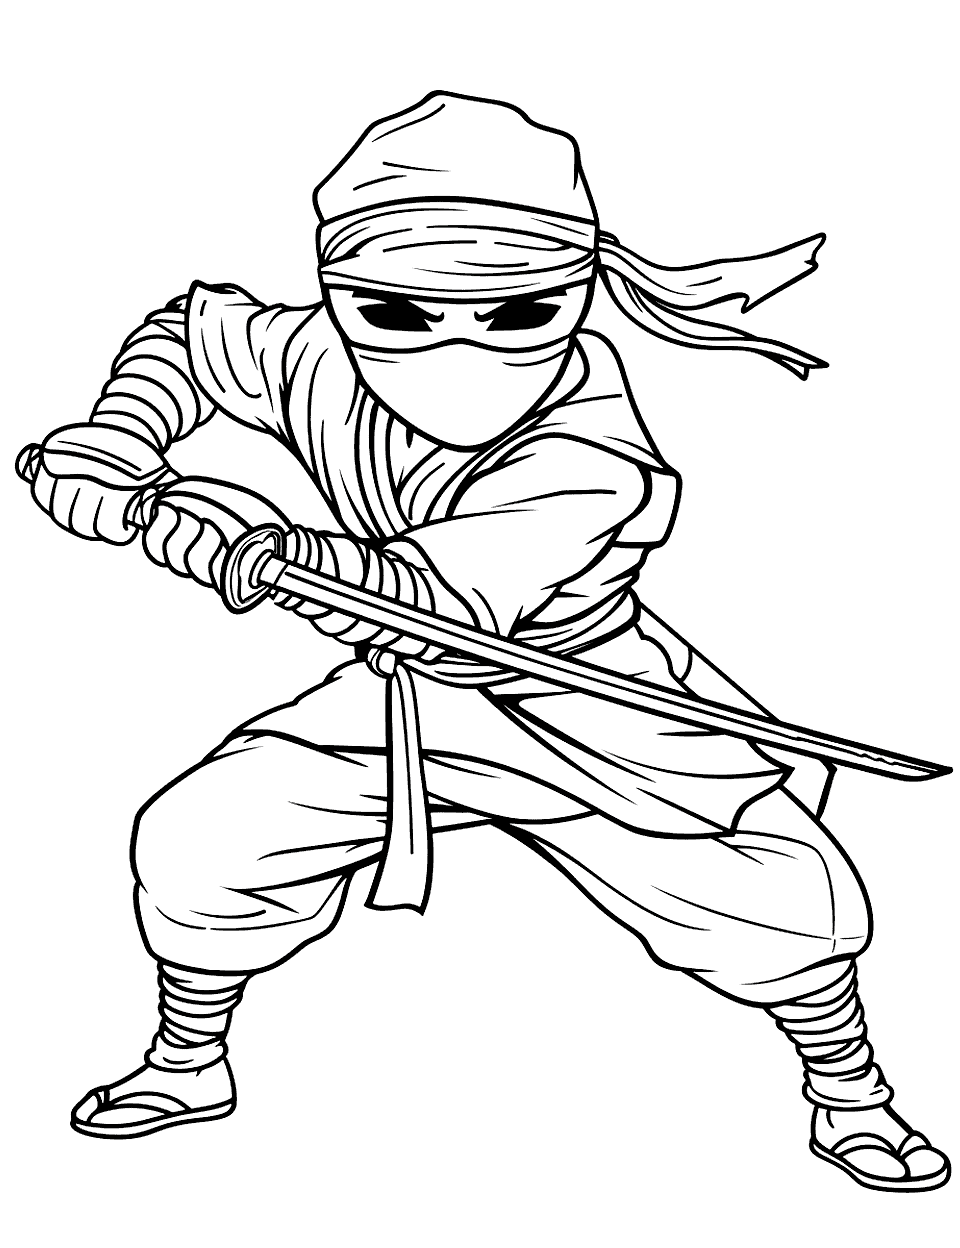 Ninja Fighting Stance Coloring Page - A ninja in a fighting stance, ready to face an unseen opponent.